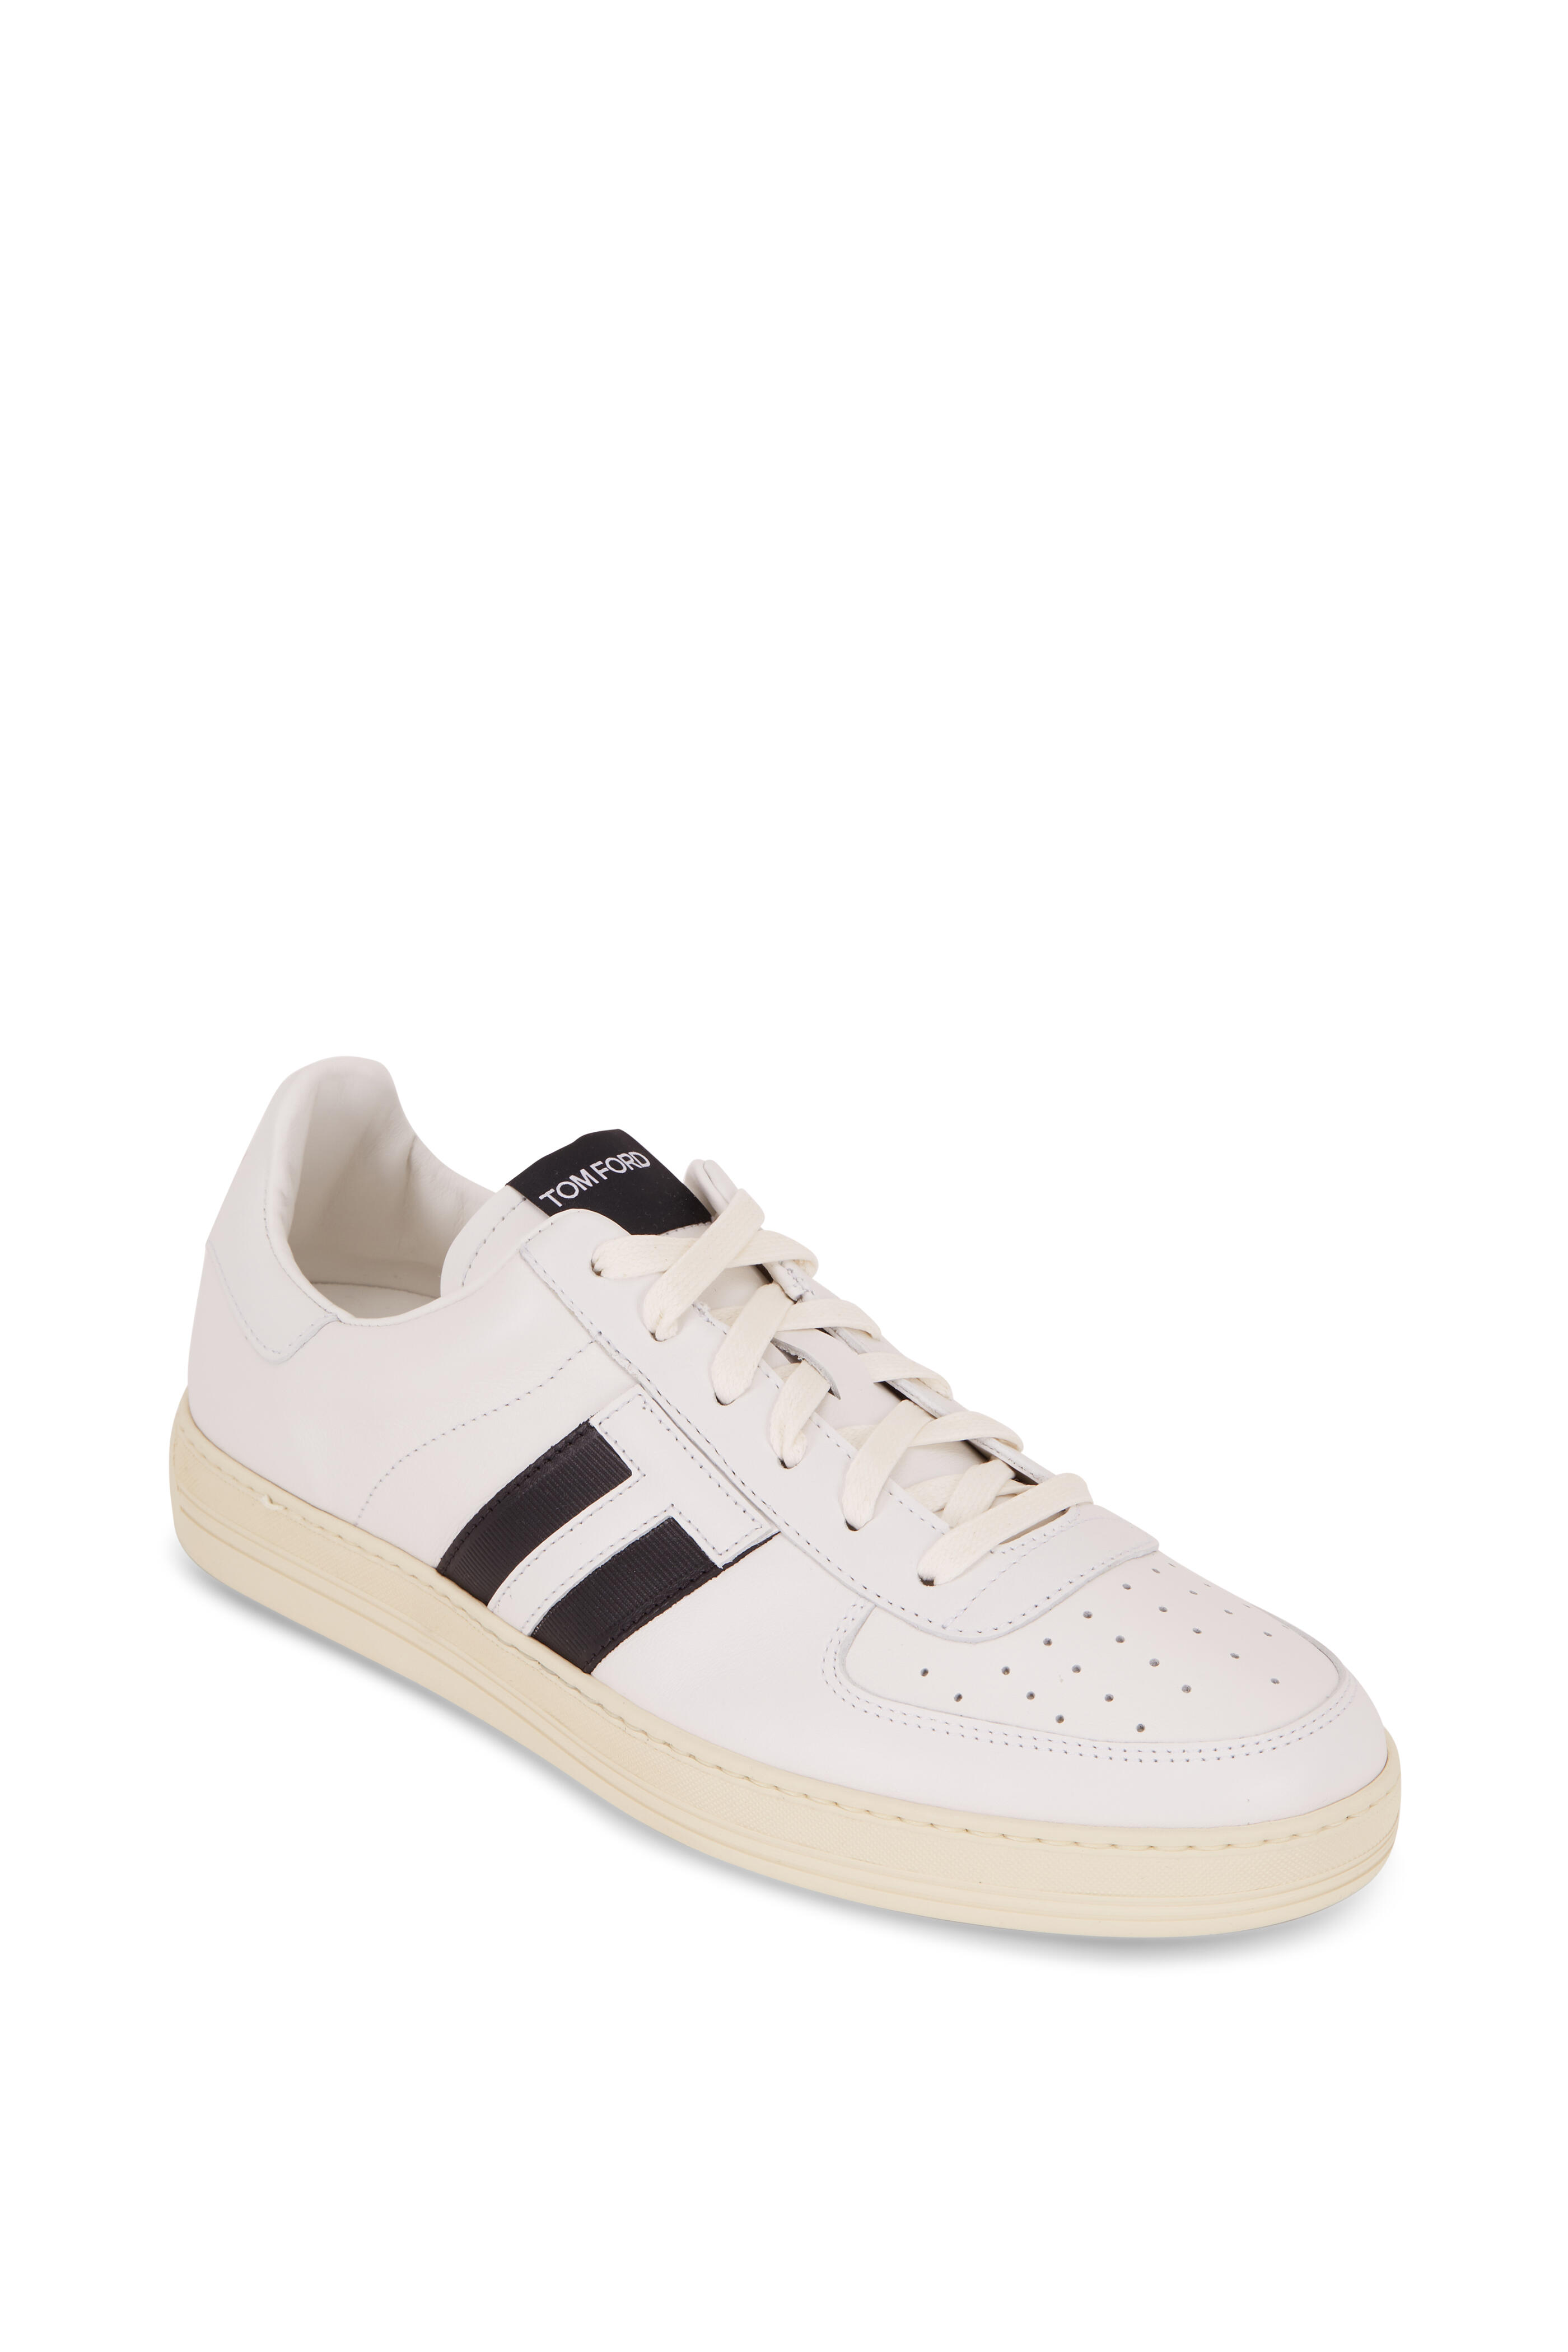 Tom Ford - Radcliffe White Leather Low-Top Sneaker